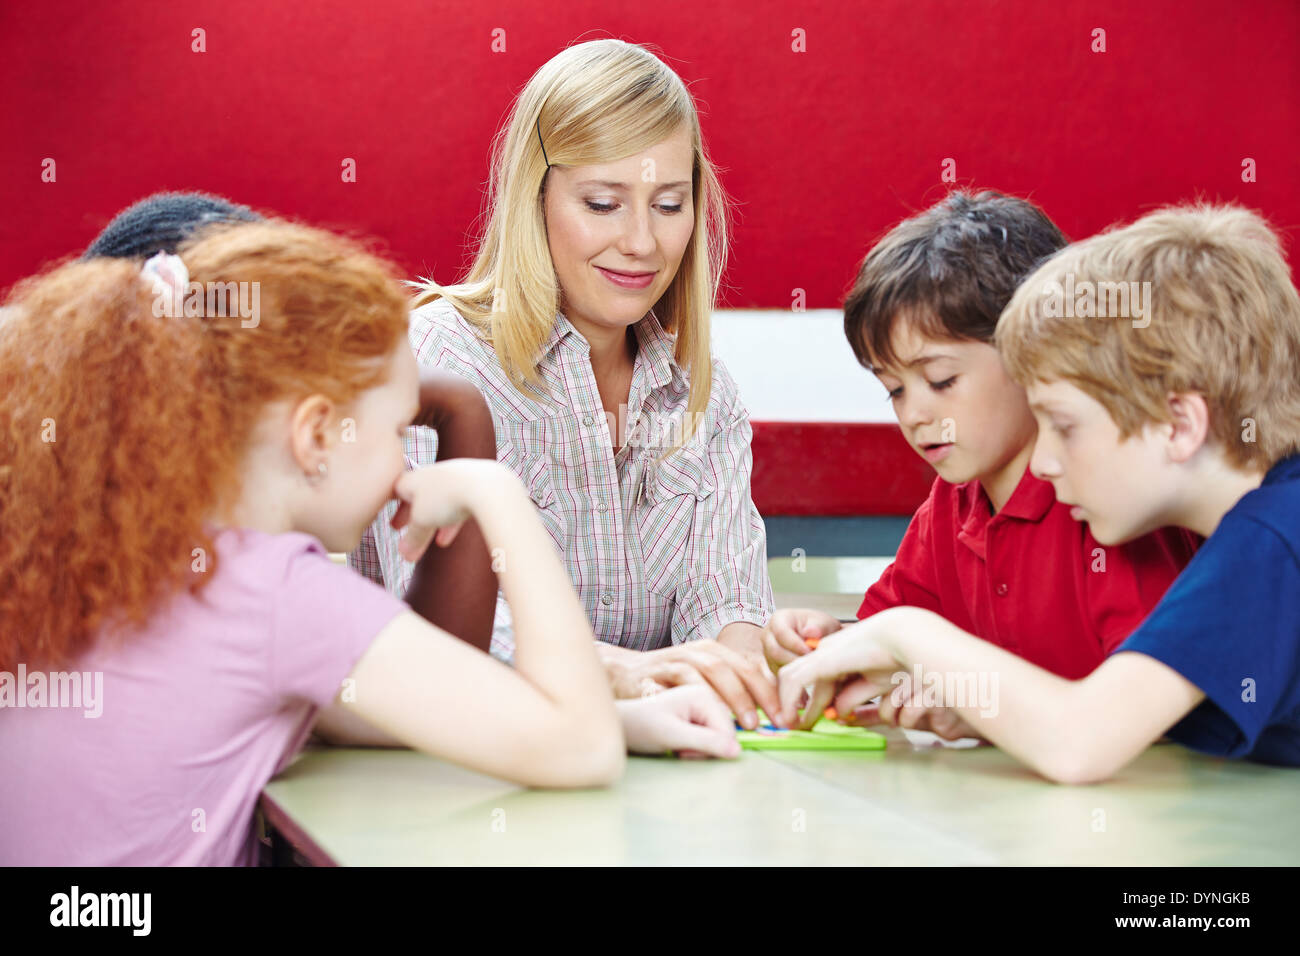 Students playing with teacher in elementary school class Stock Photo